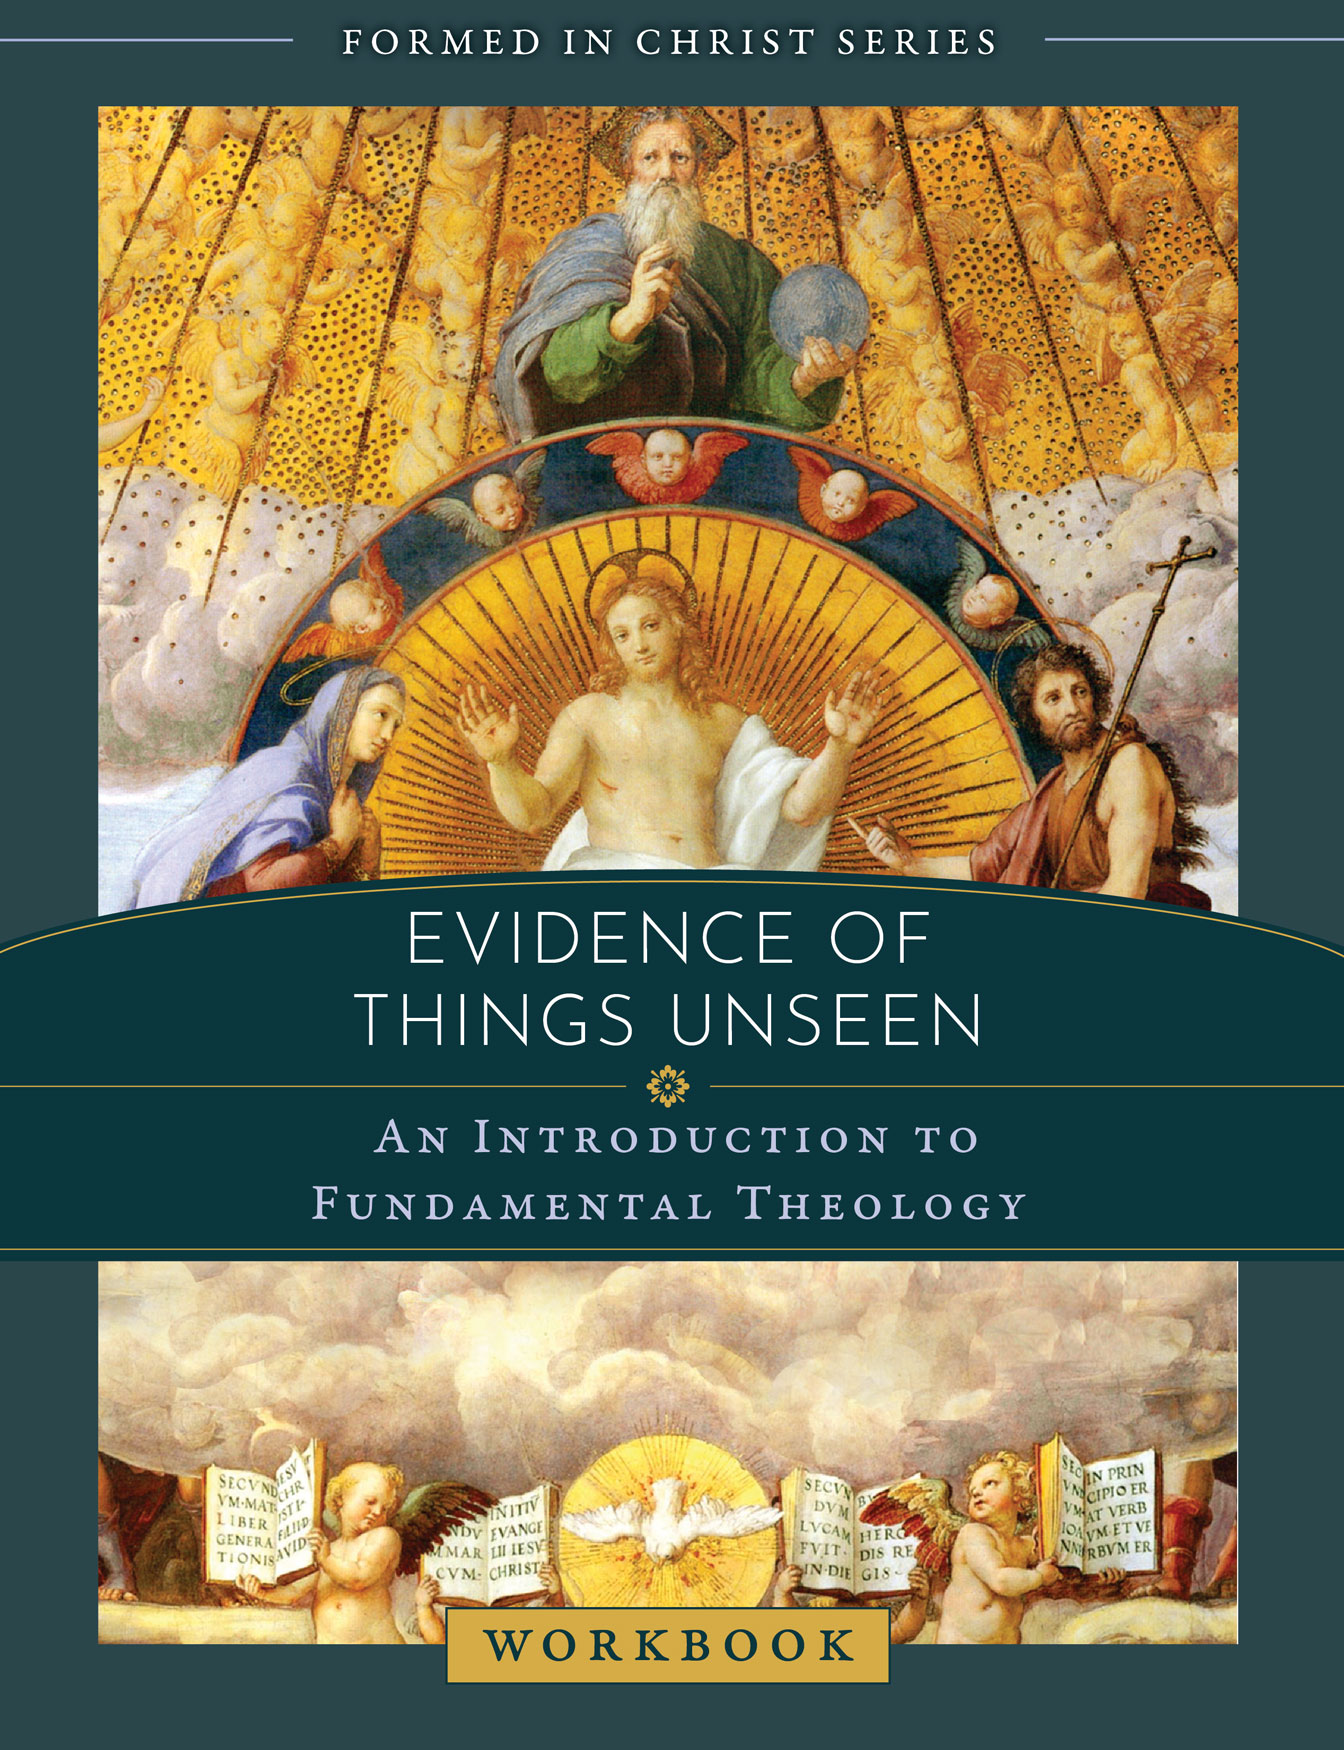 Formed in Christ Evidence of Things Unseen Workbook / Andrew Willard Jones and Louis St Hilaire